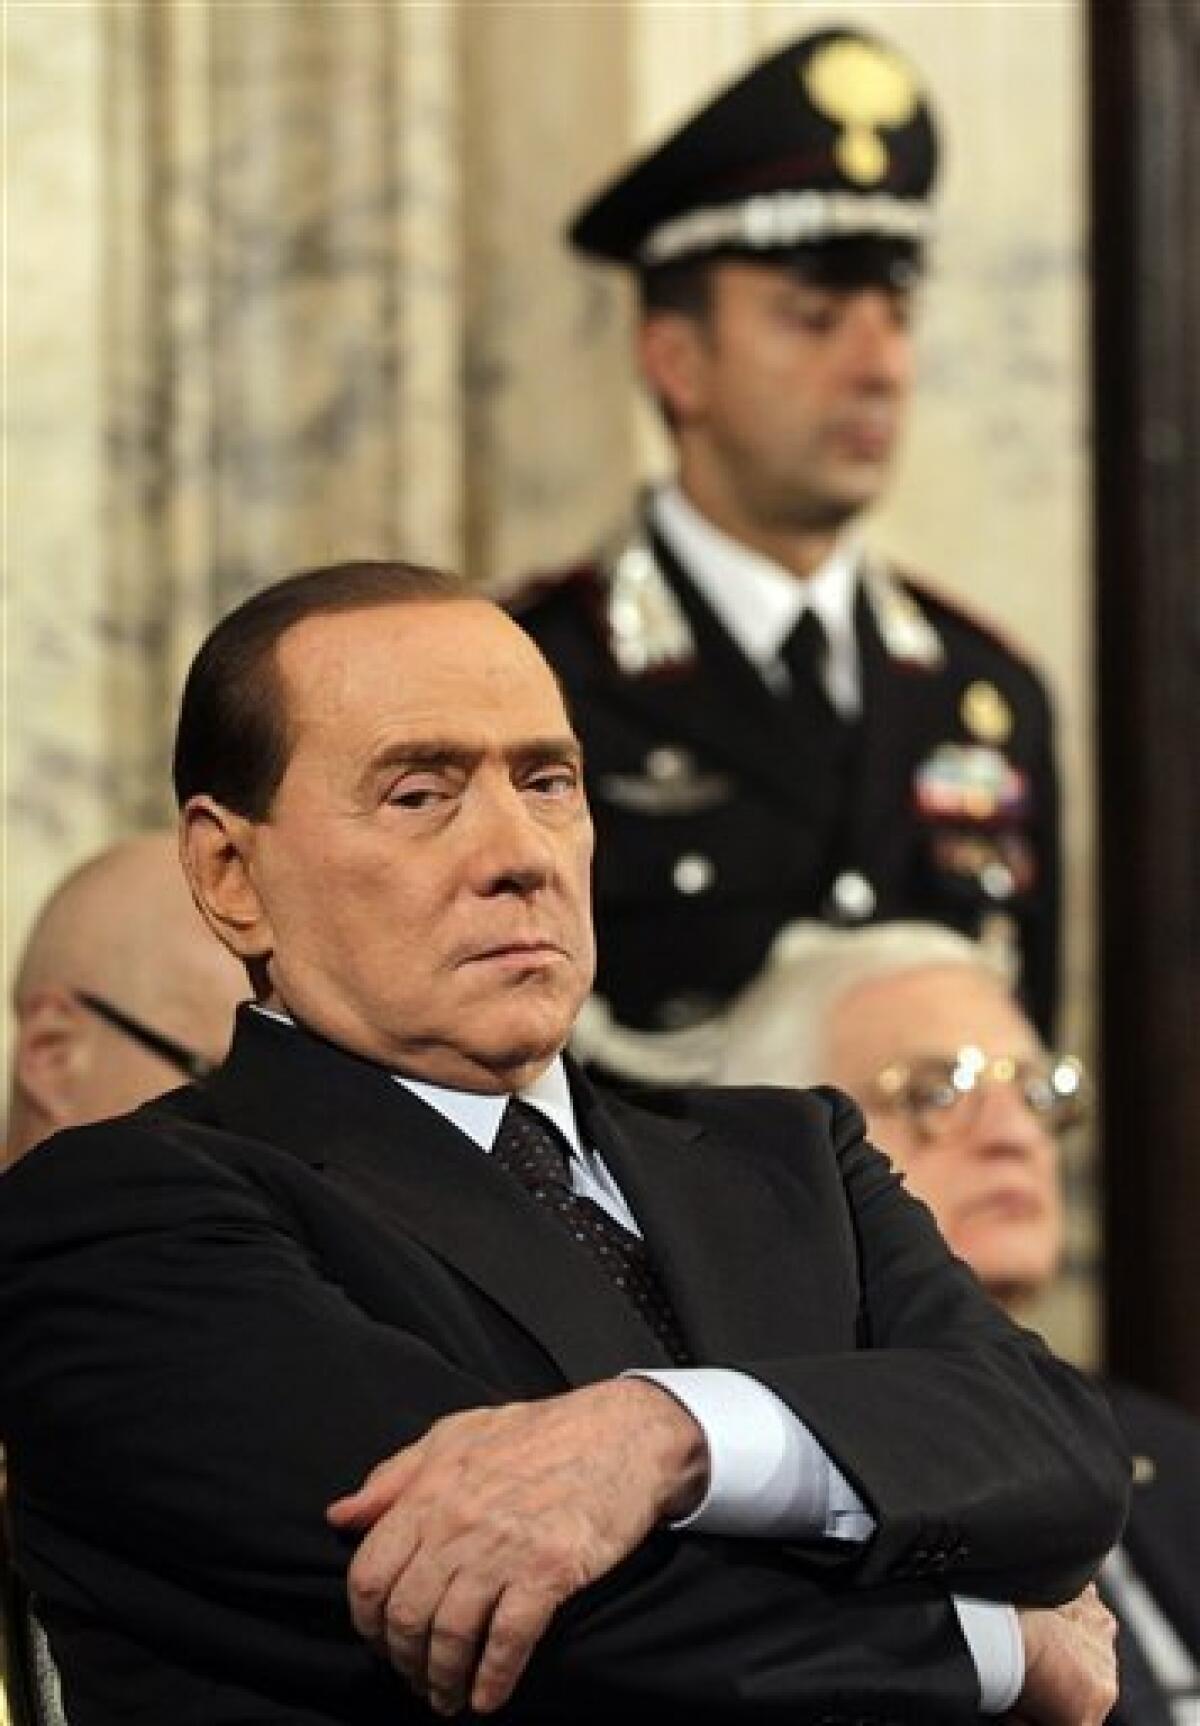 FILE - In this Monday, Dec. 20, 2010 file photo, Italian premier Silvio Berlusconi sits as he listen to a speech during the traditional meeting at the Quirinale Presidential palace called to exchange Christmas greetings in Rome. Italy's leading newspaper is reporting that Premier Silvio Berlusconi is under investigation in a prostitution case involving a then-17-year-old Moroccan girl. Corriere della Sera reported online Friday, Jan. 14, 2011, that the 74-year-old premier is suspected of abusing his power in trying to cover up his alleged encounters with the girl, nicknamed Ruby. Berlusconi's office said it had no immediate comment. (AP Photo/Alessandra Tarantino, File)